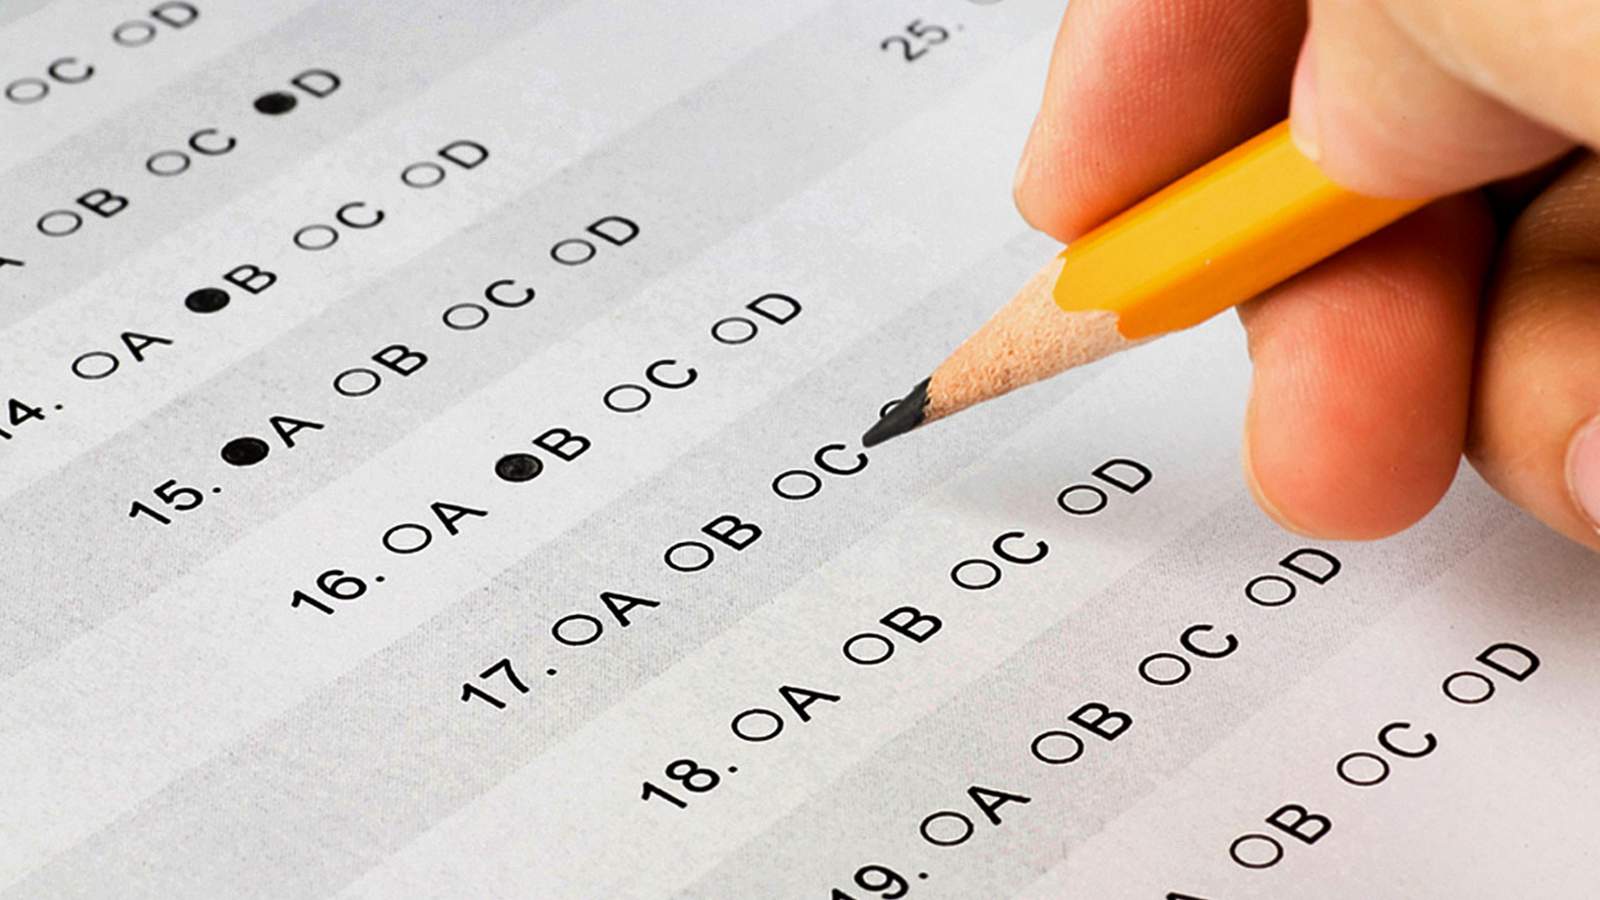 Michigan asks to waive standardized testing for 2020-2021 school year